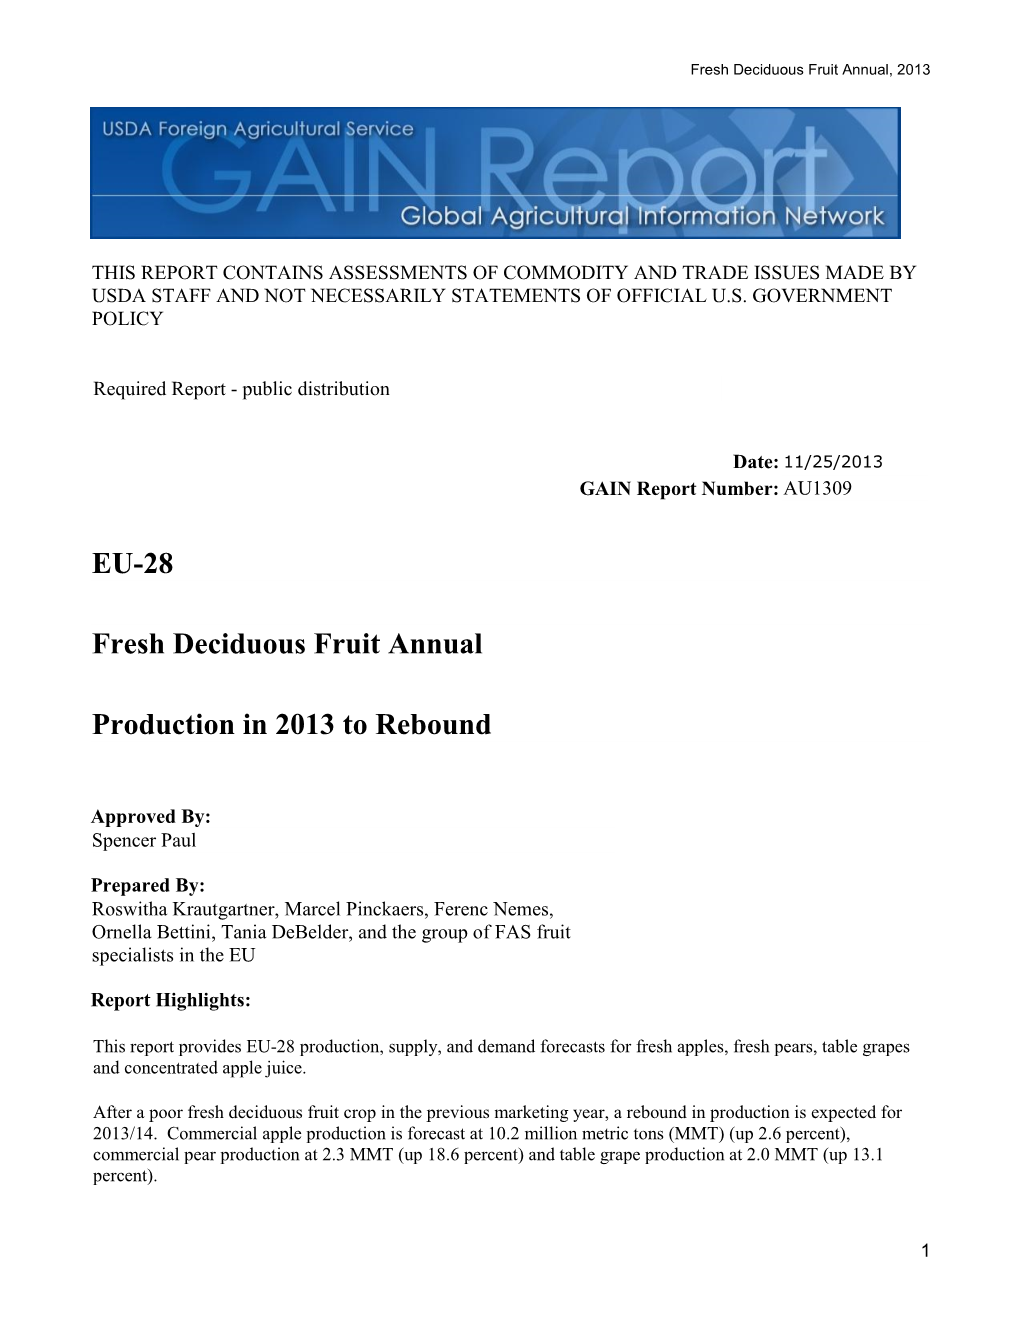 Production in 2013 to Rebound Fresh Deciduous Fruit Annual EU-28